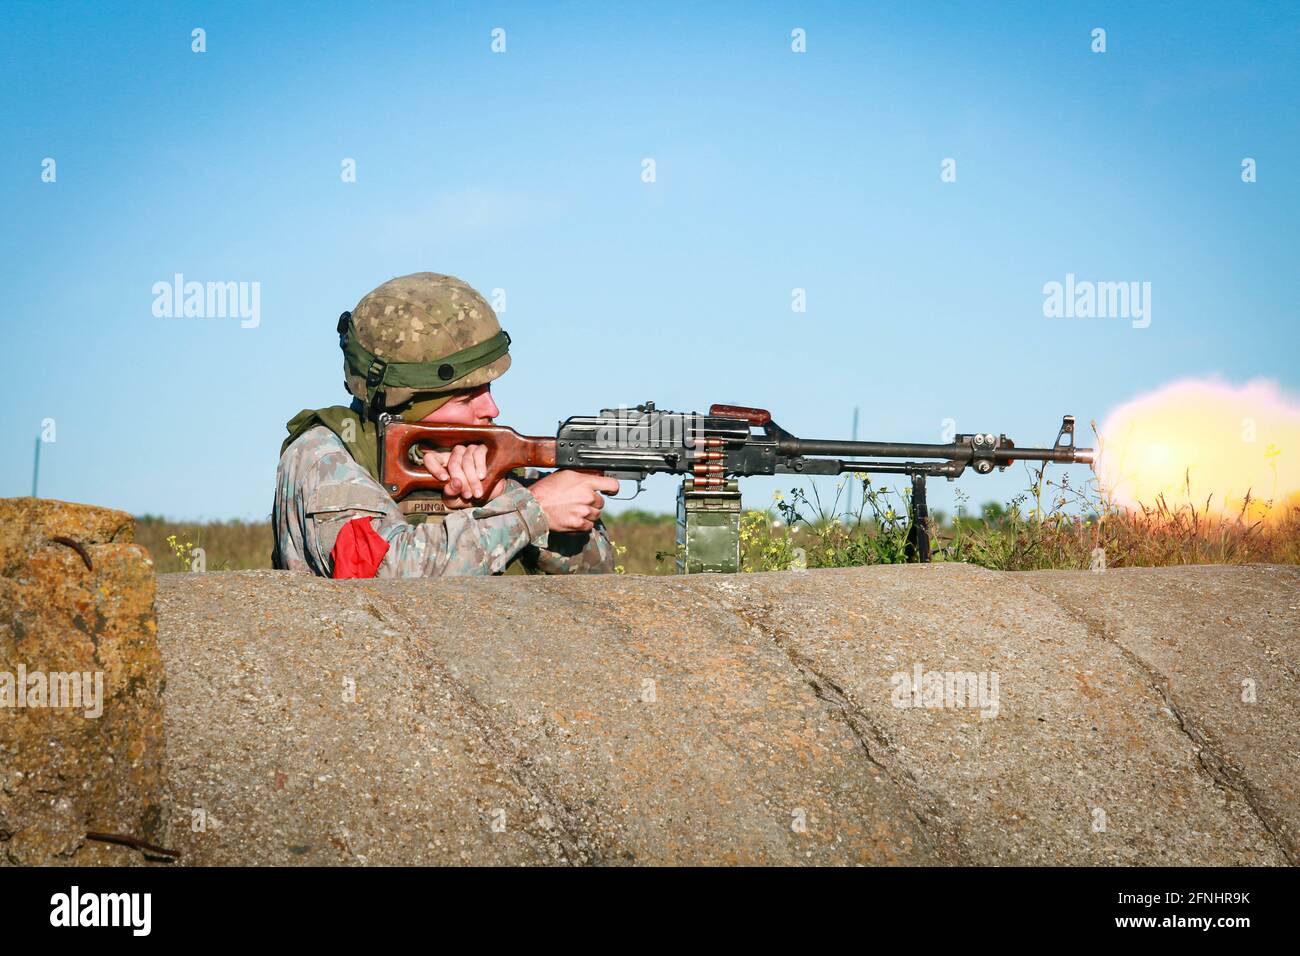 A Romanian soldier assigned to the 635th Iron Defense Artillery Unit, 15th Brigade, 4th Division fires a PKM style light machine gun during exercise Swift Response 21 at Babadag Training Area, May 15, 2021 in Babadag, Romania. Stock Photo